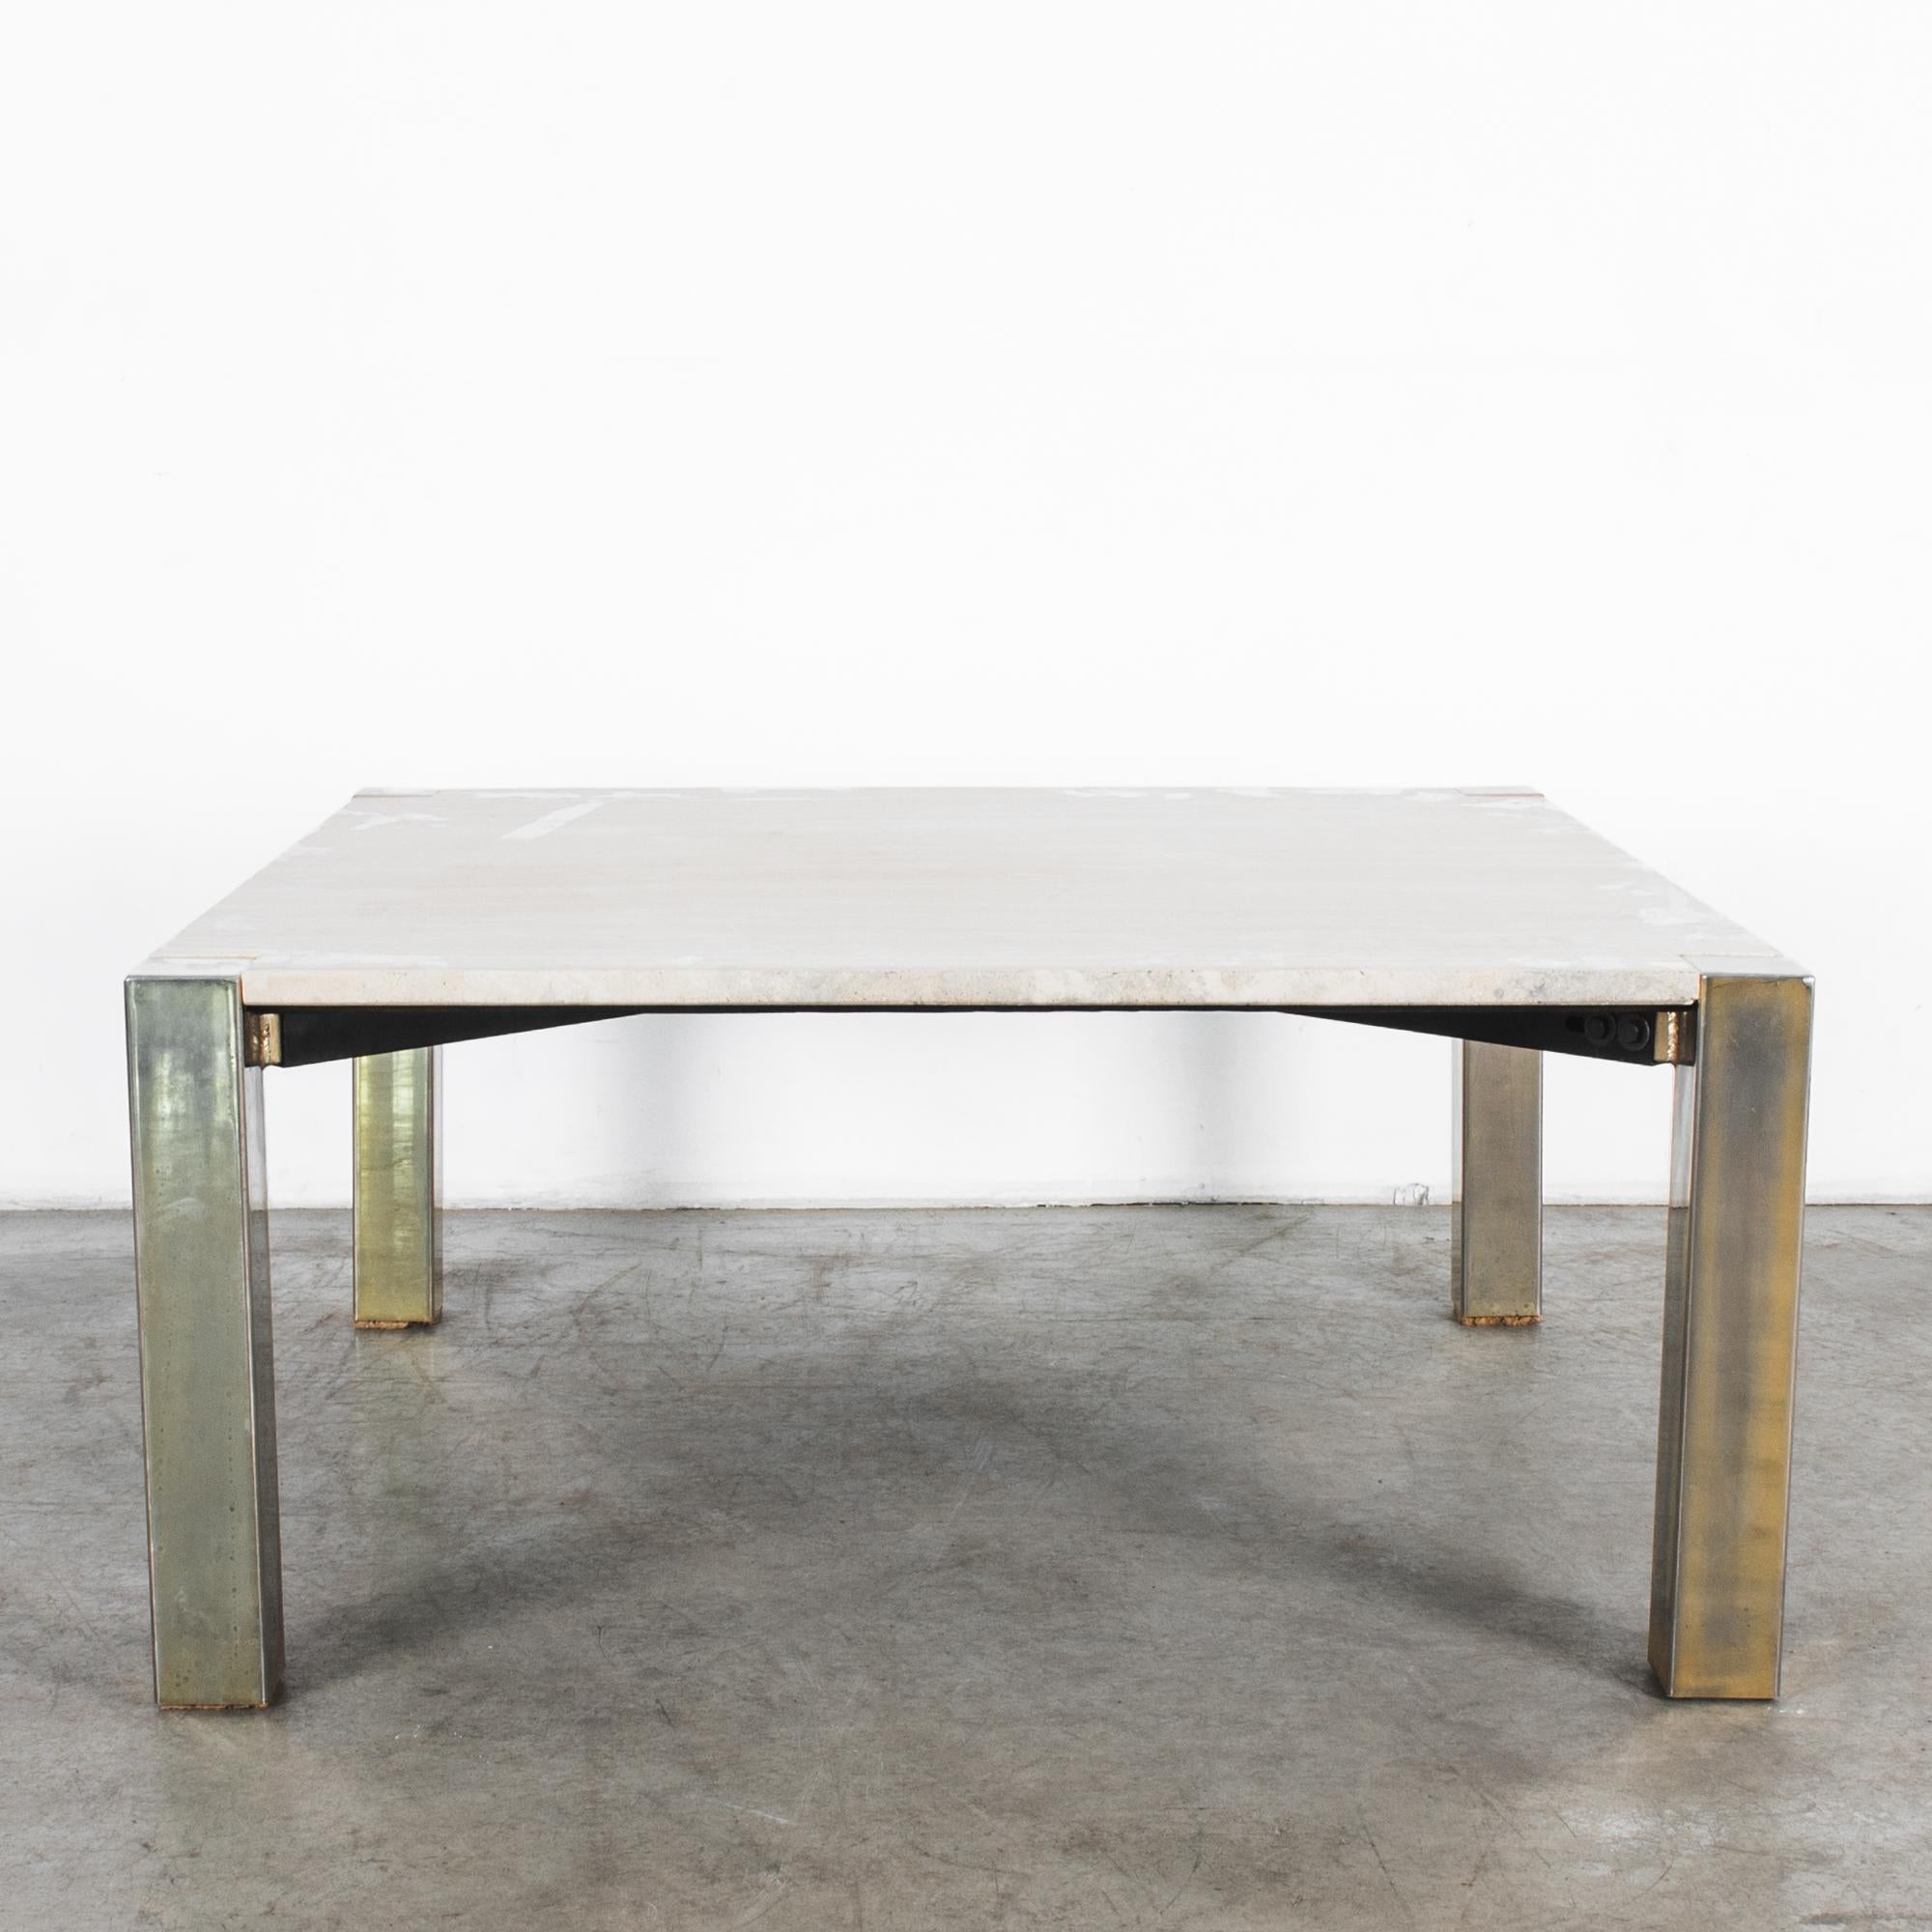 A sleek design from Italy, minimal metal legs, plated in brass, hold a square travertine top in this 1970s coffee table. One meter by one meter, carefully polished and cut, the brass legs interlock with stone to complete the Stark geometric form.